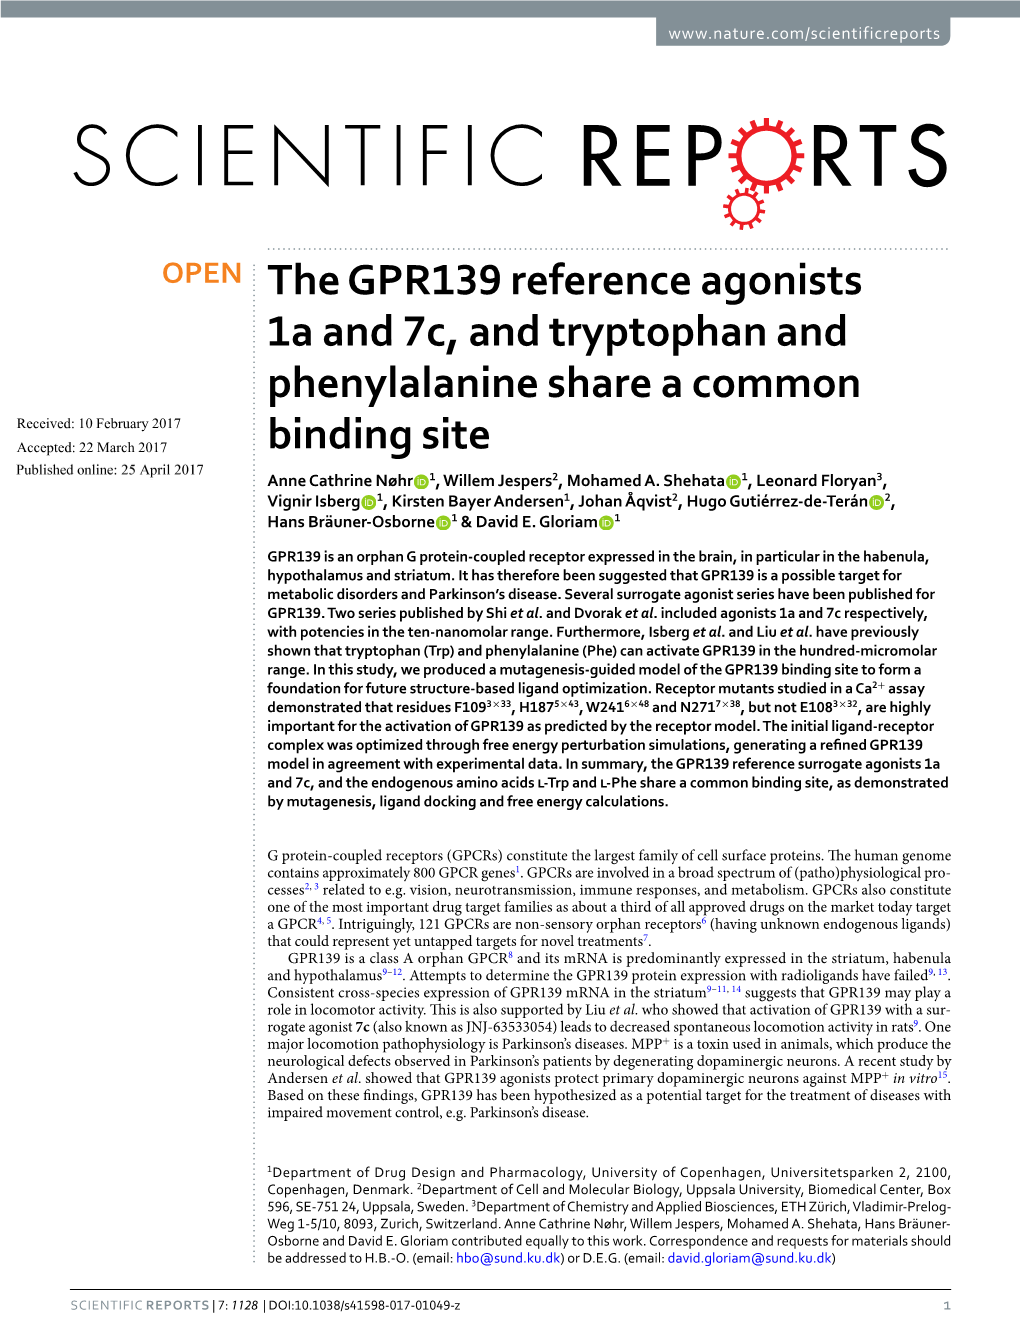 The GPR139 Reference Agonists 1A and 7C, and Tryptophan And